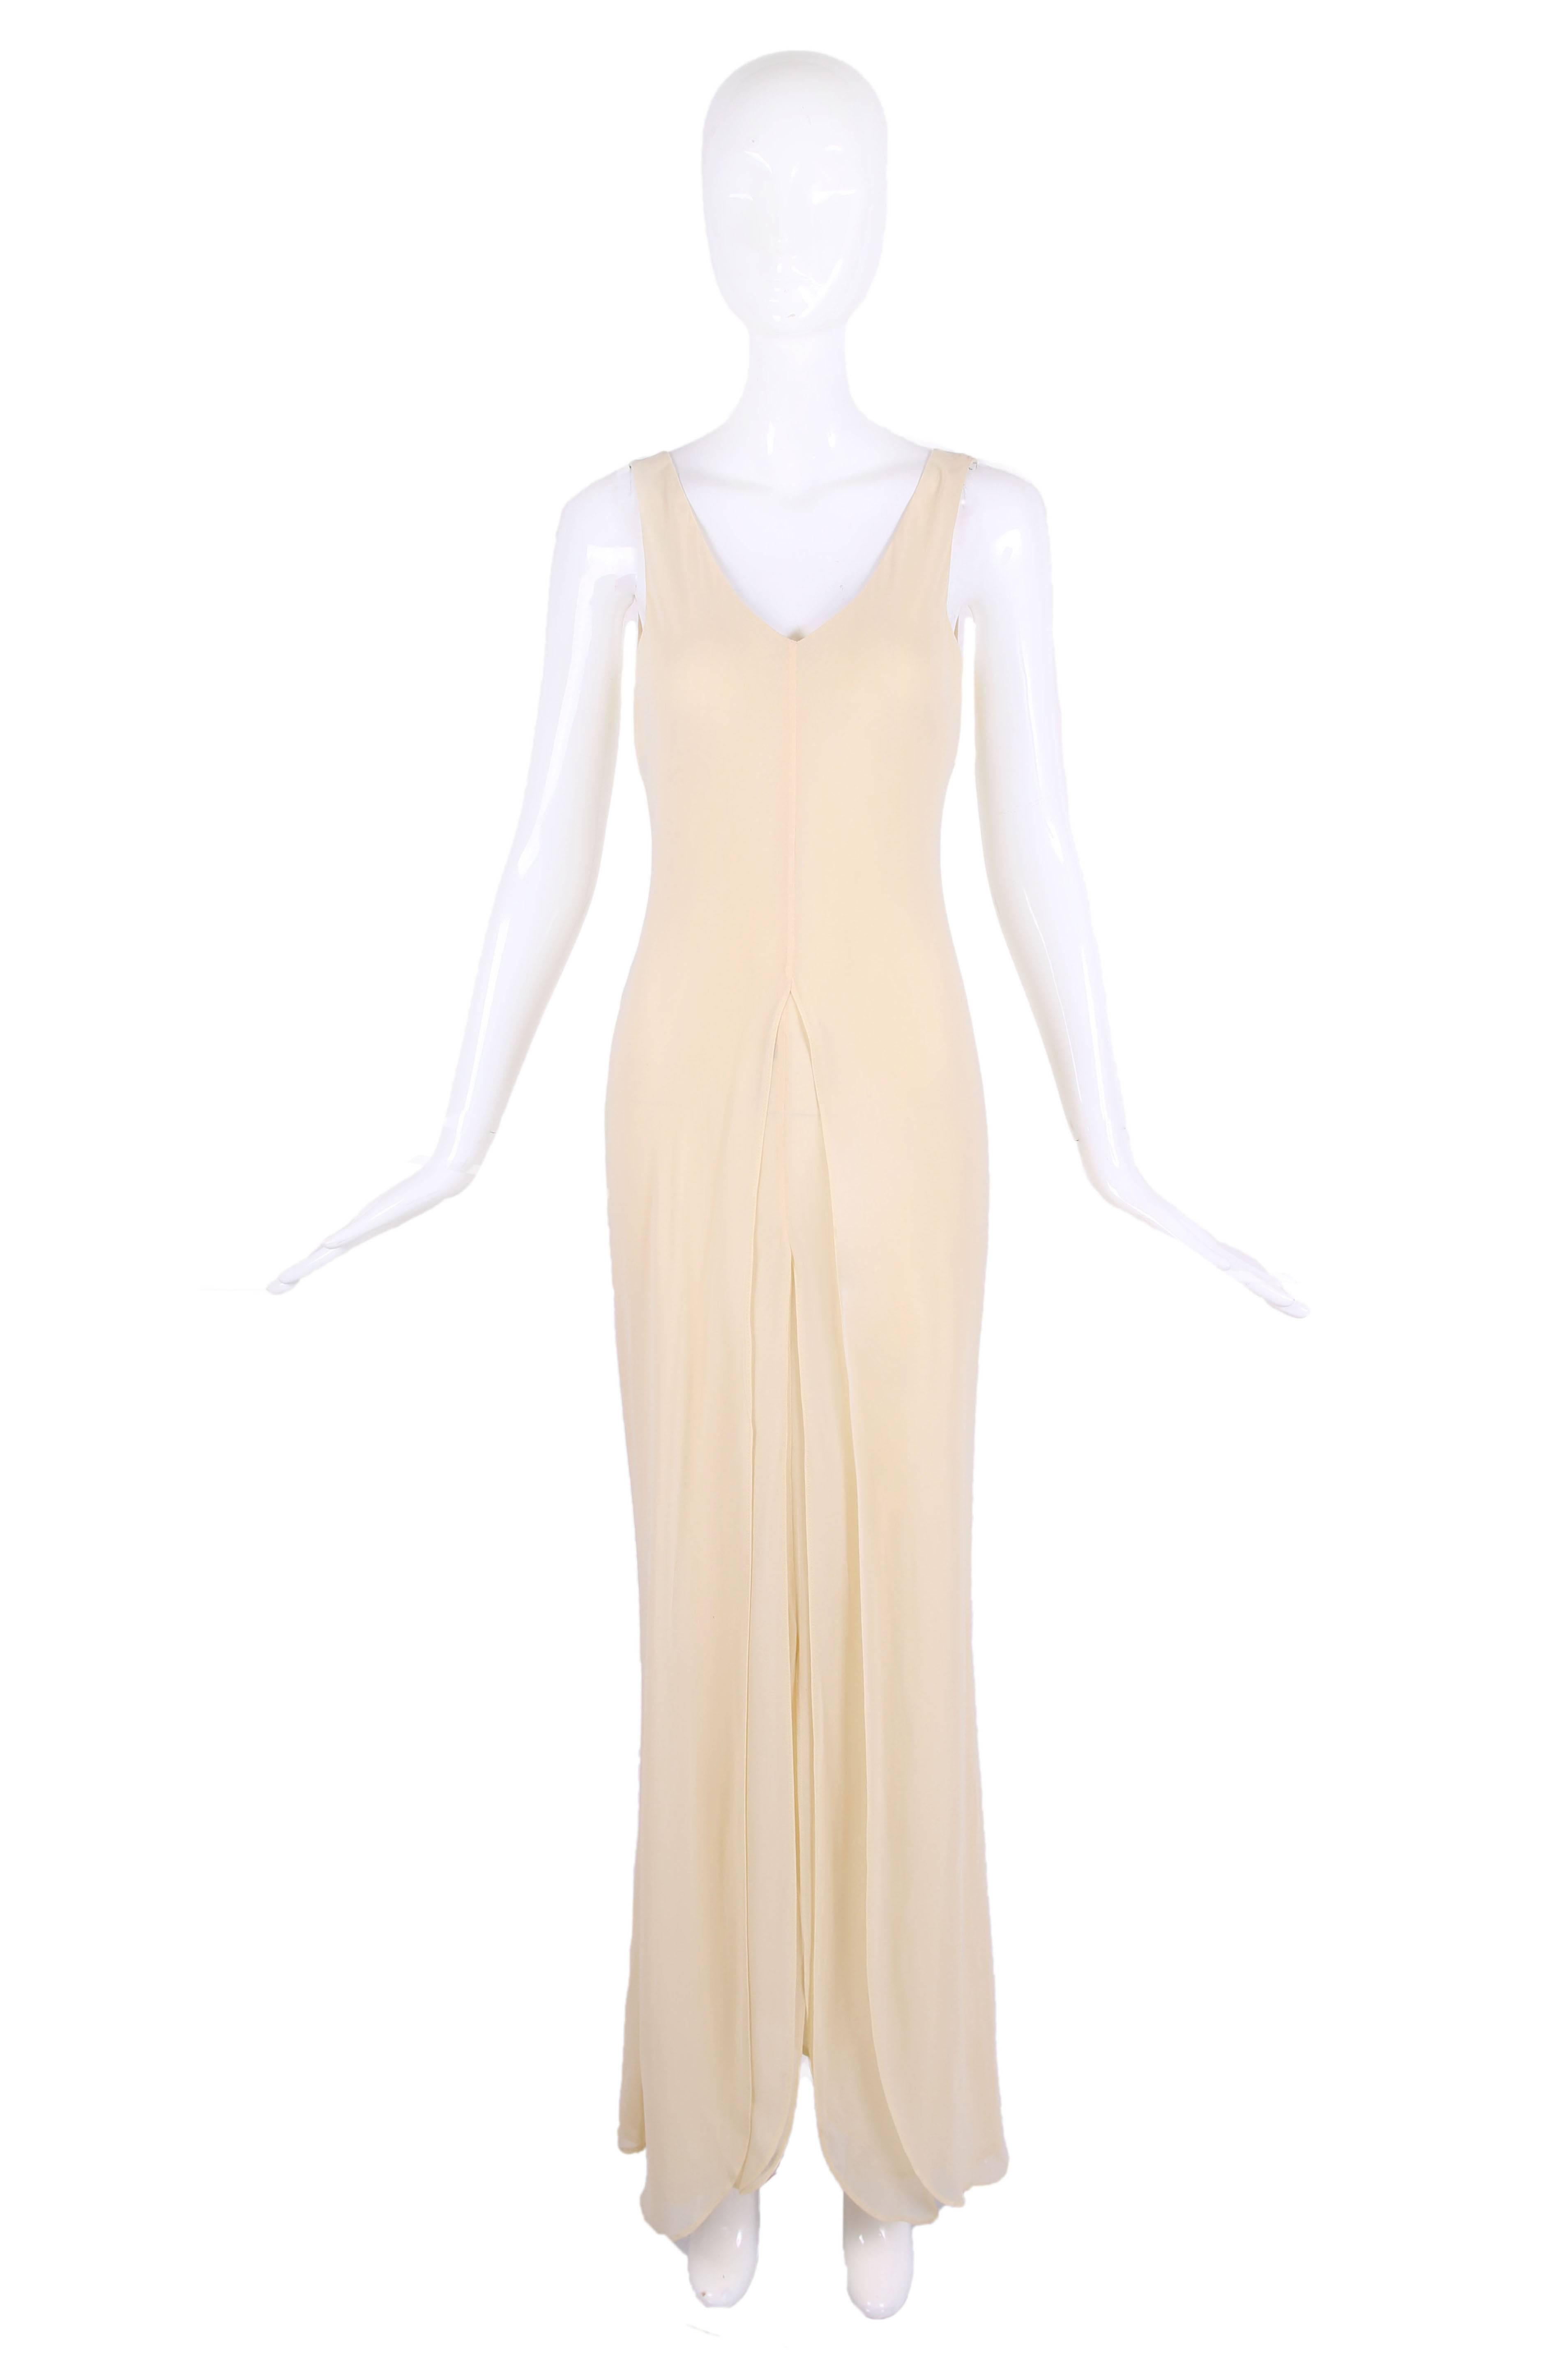 Alberta Ferretti cream-colored sleeveless triple-layered bias cut rayon gown. Size tag US 8 but fits more like a 6. In very good to excellent condition with a few tiny tiny holes  that are almost impossible to see located at the back hem. Please